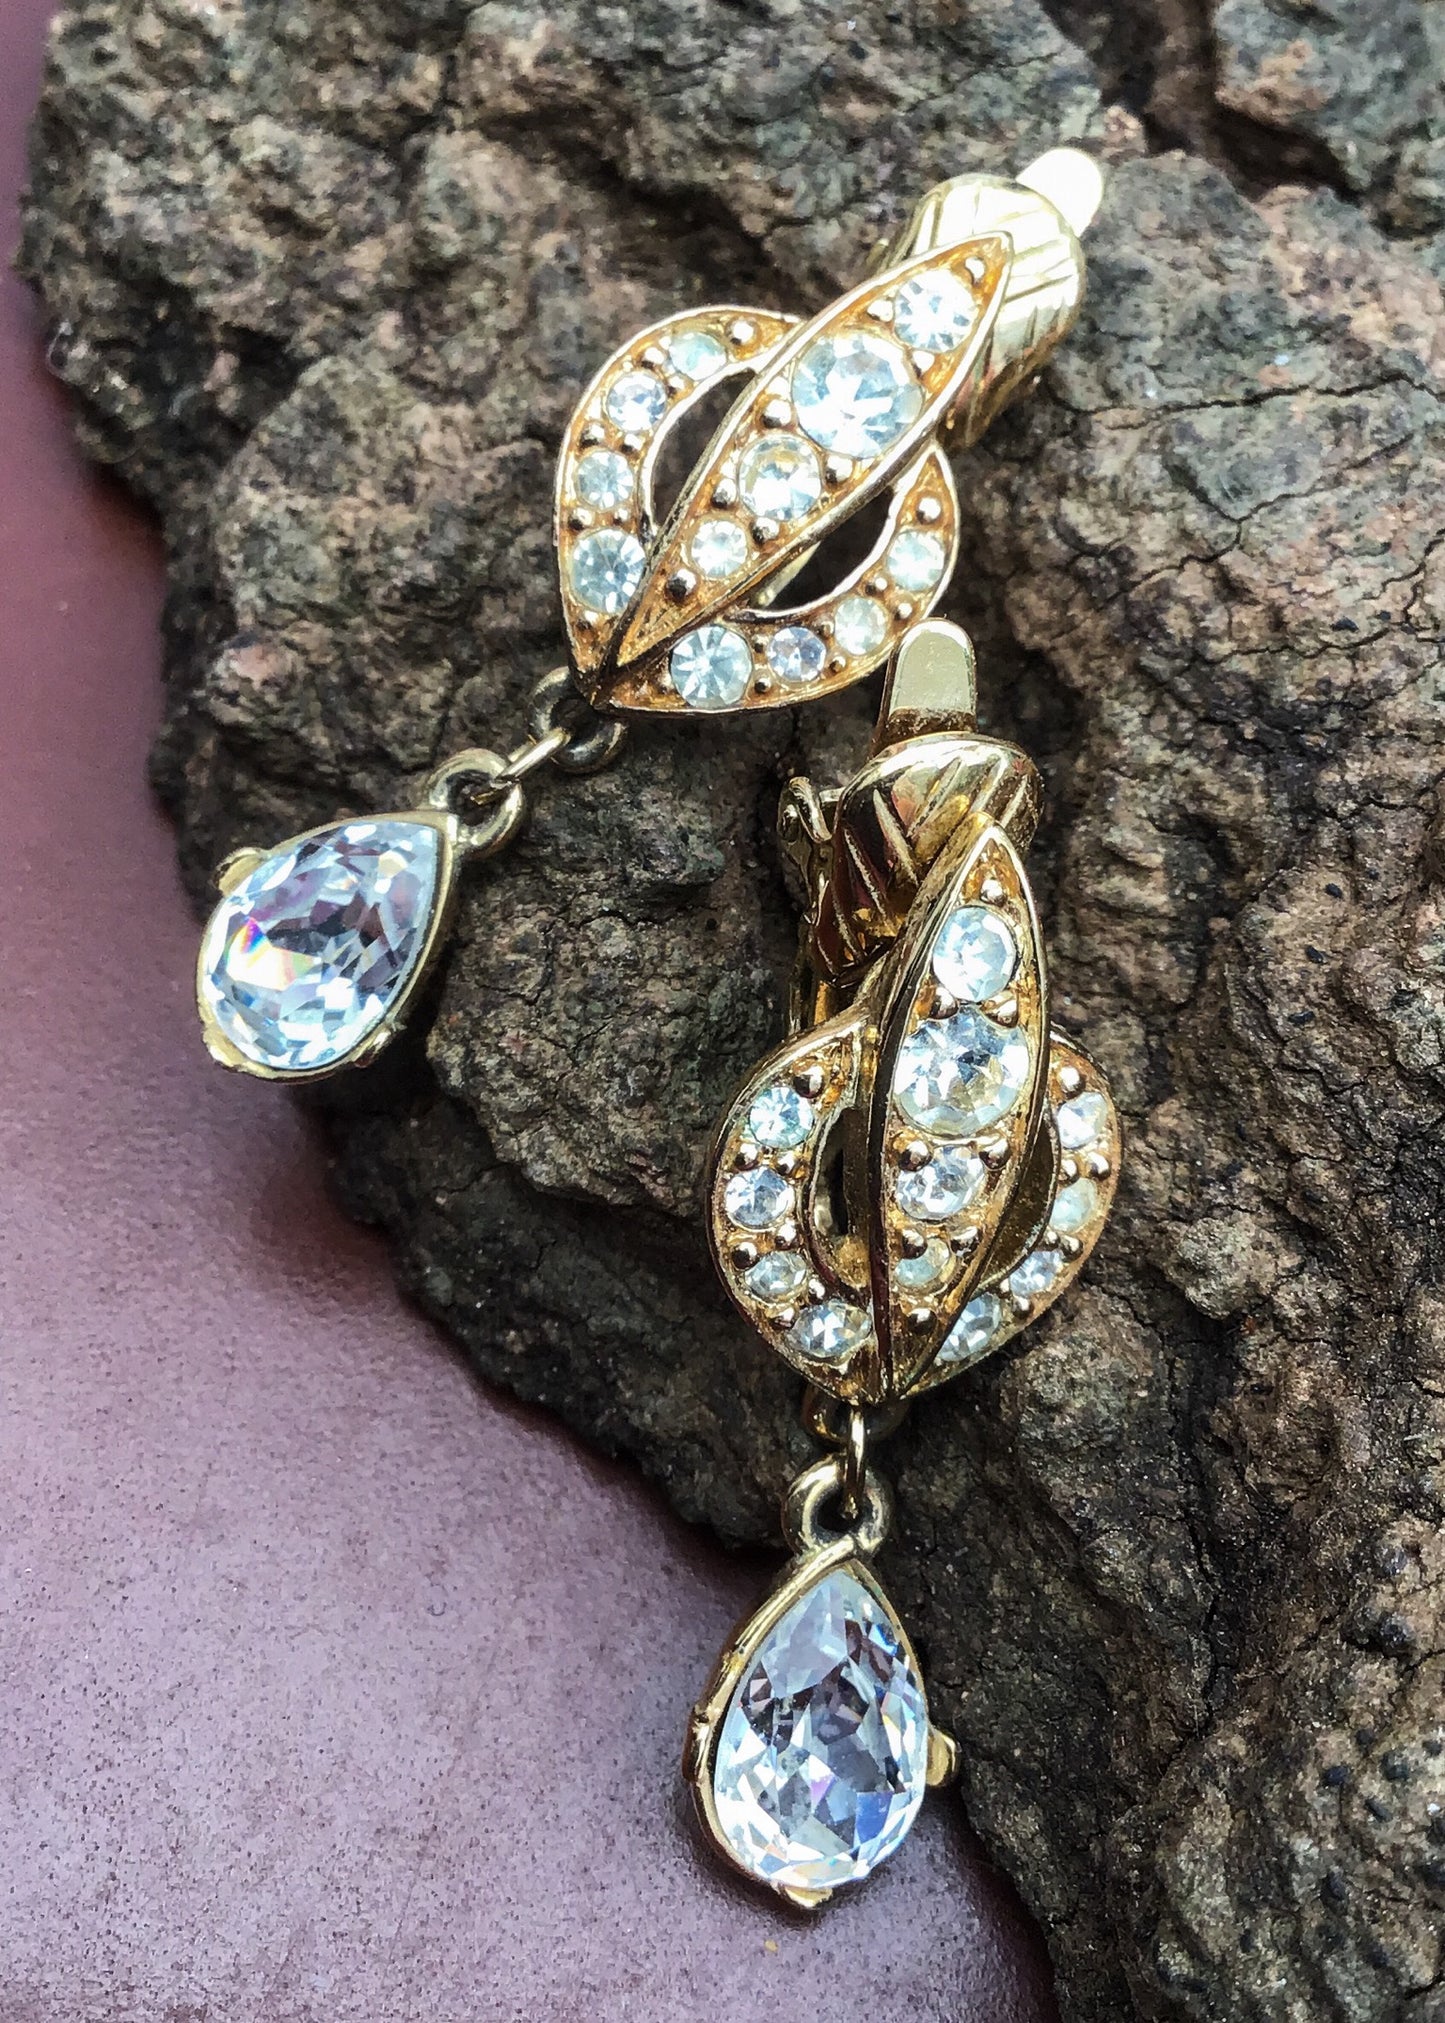 Trifari TM gangle crystal diamonte earrings, on a gold tone with the sparkliest stones ever. Perfect old hollywood glamour vintage jewellery.